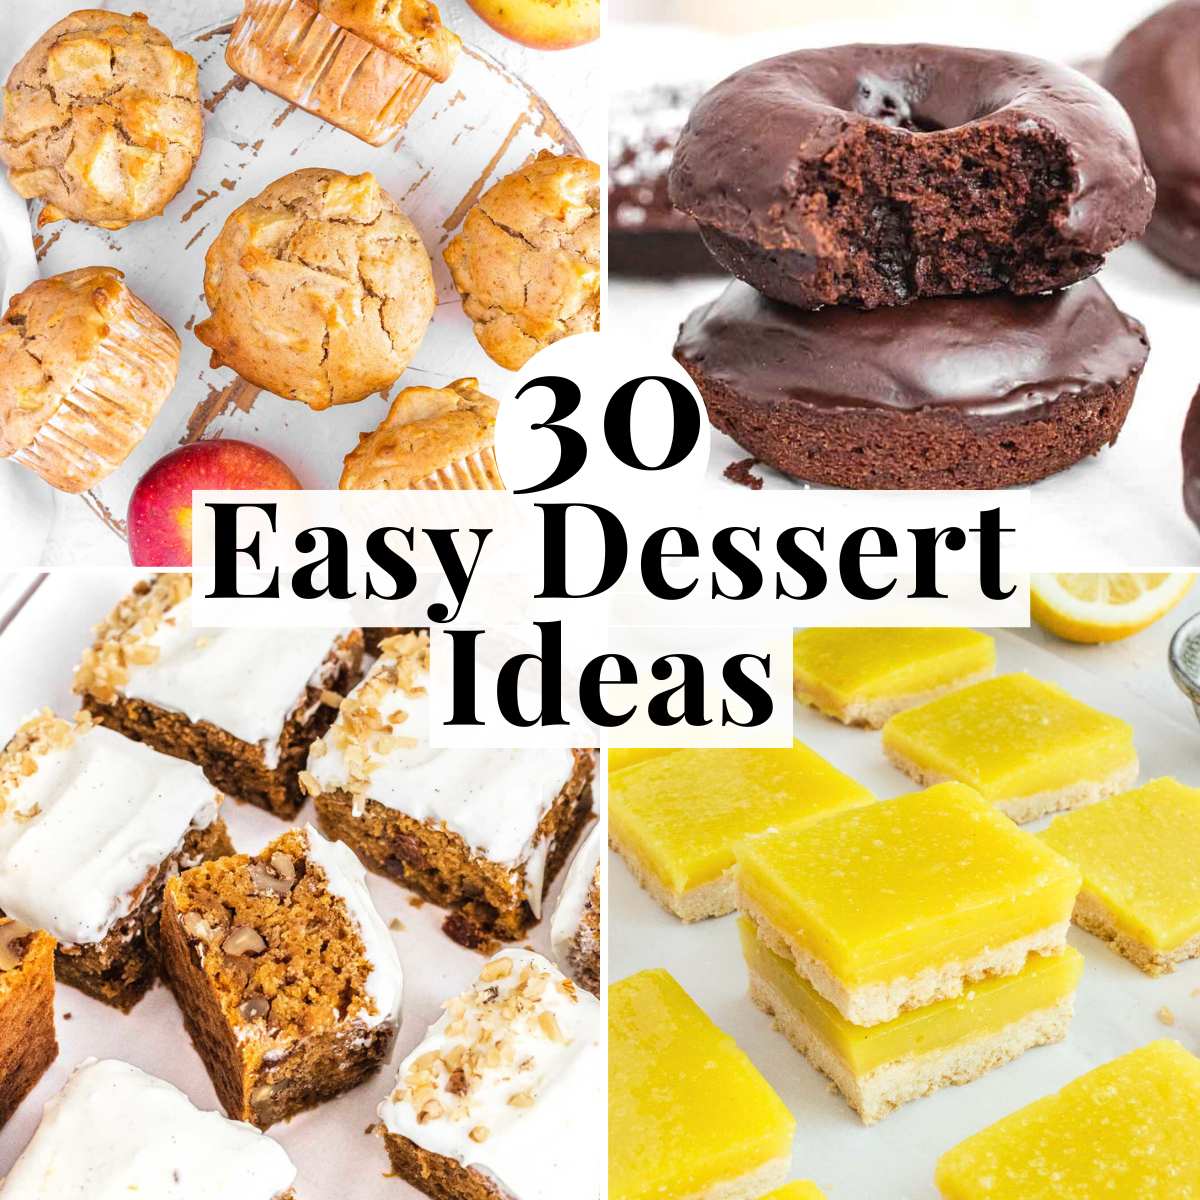 Easy dessert ideas with quick muffins and cakes